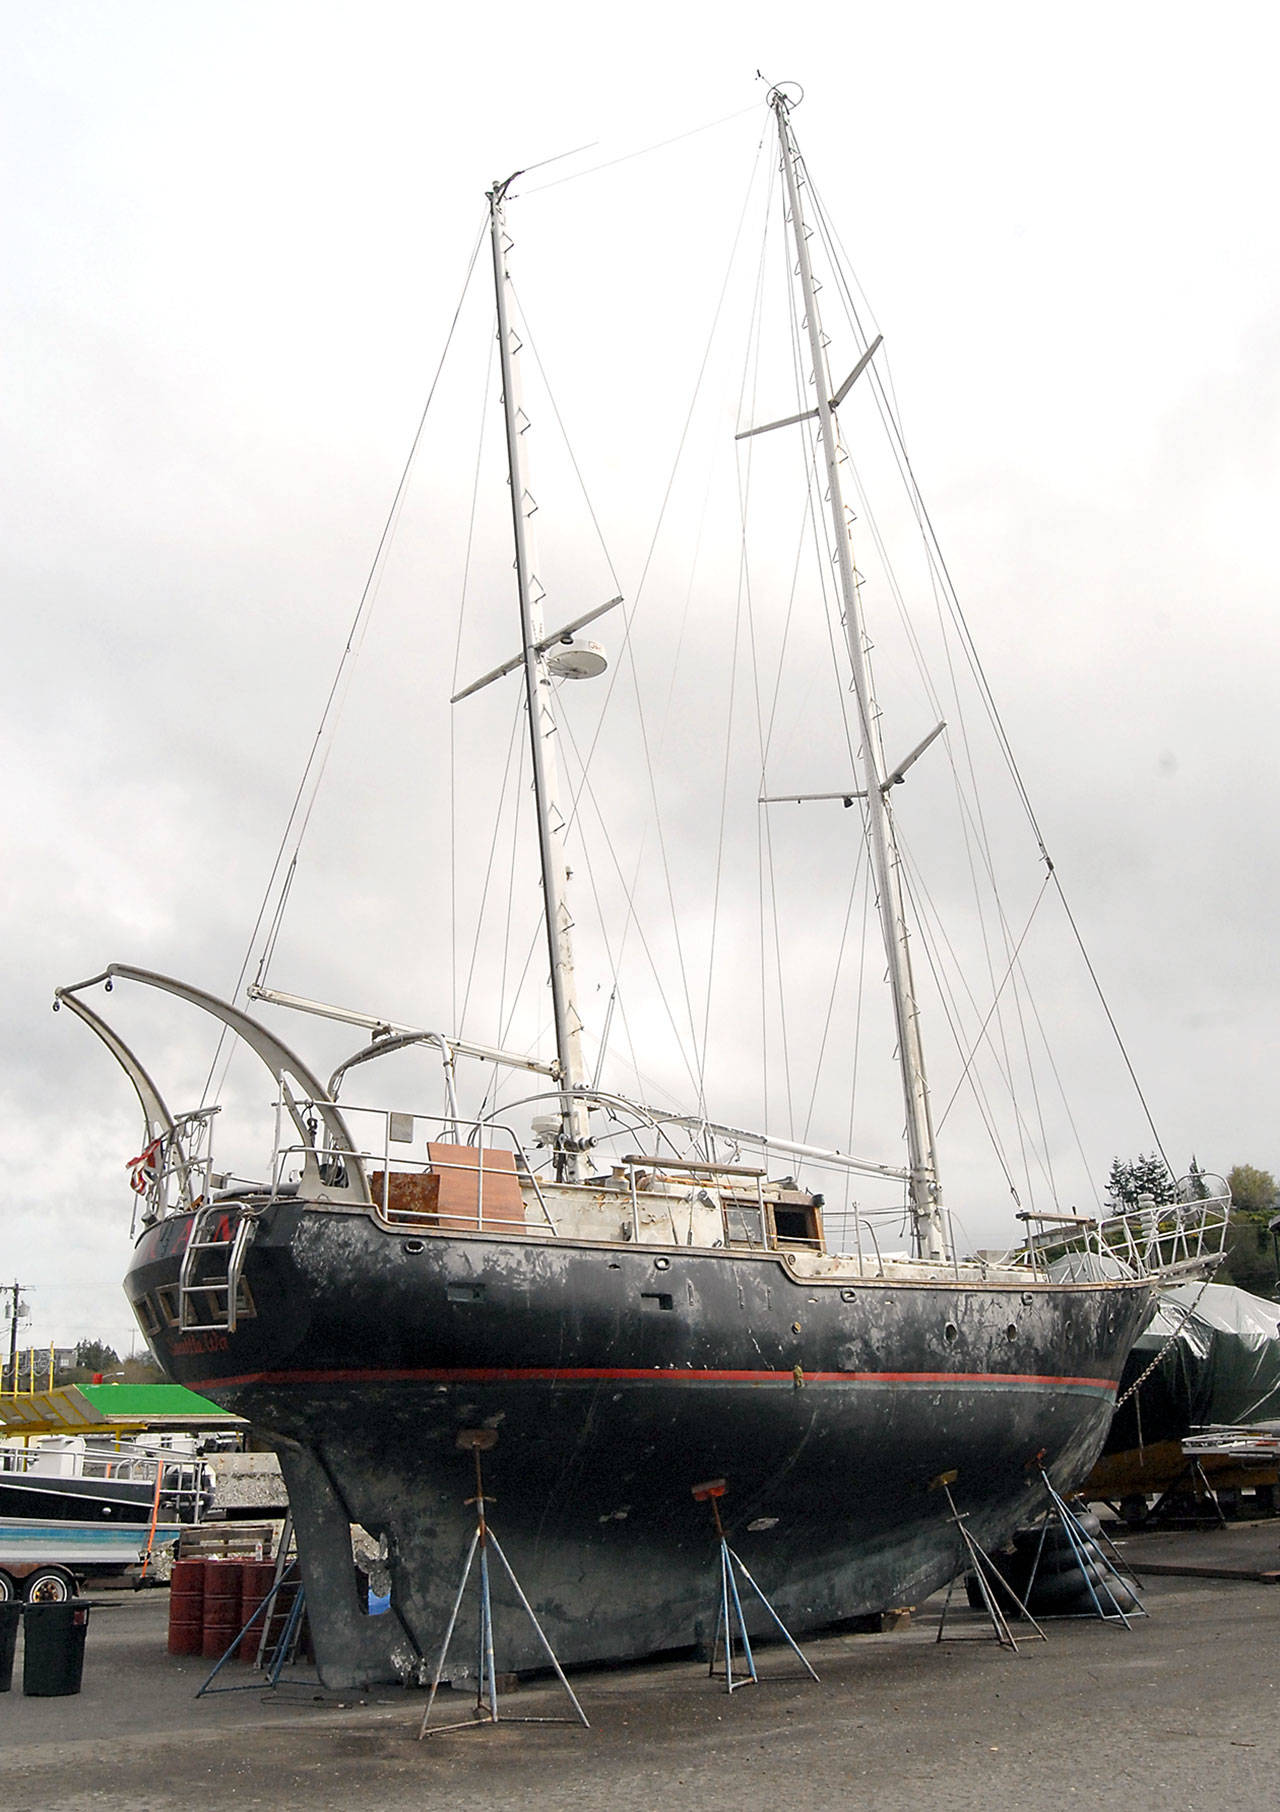 The sailboat Fram sits in a boat storage area on Friday at Port Angeles Boat Haven. (Keith Thorpe/Peninsula Daily News)